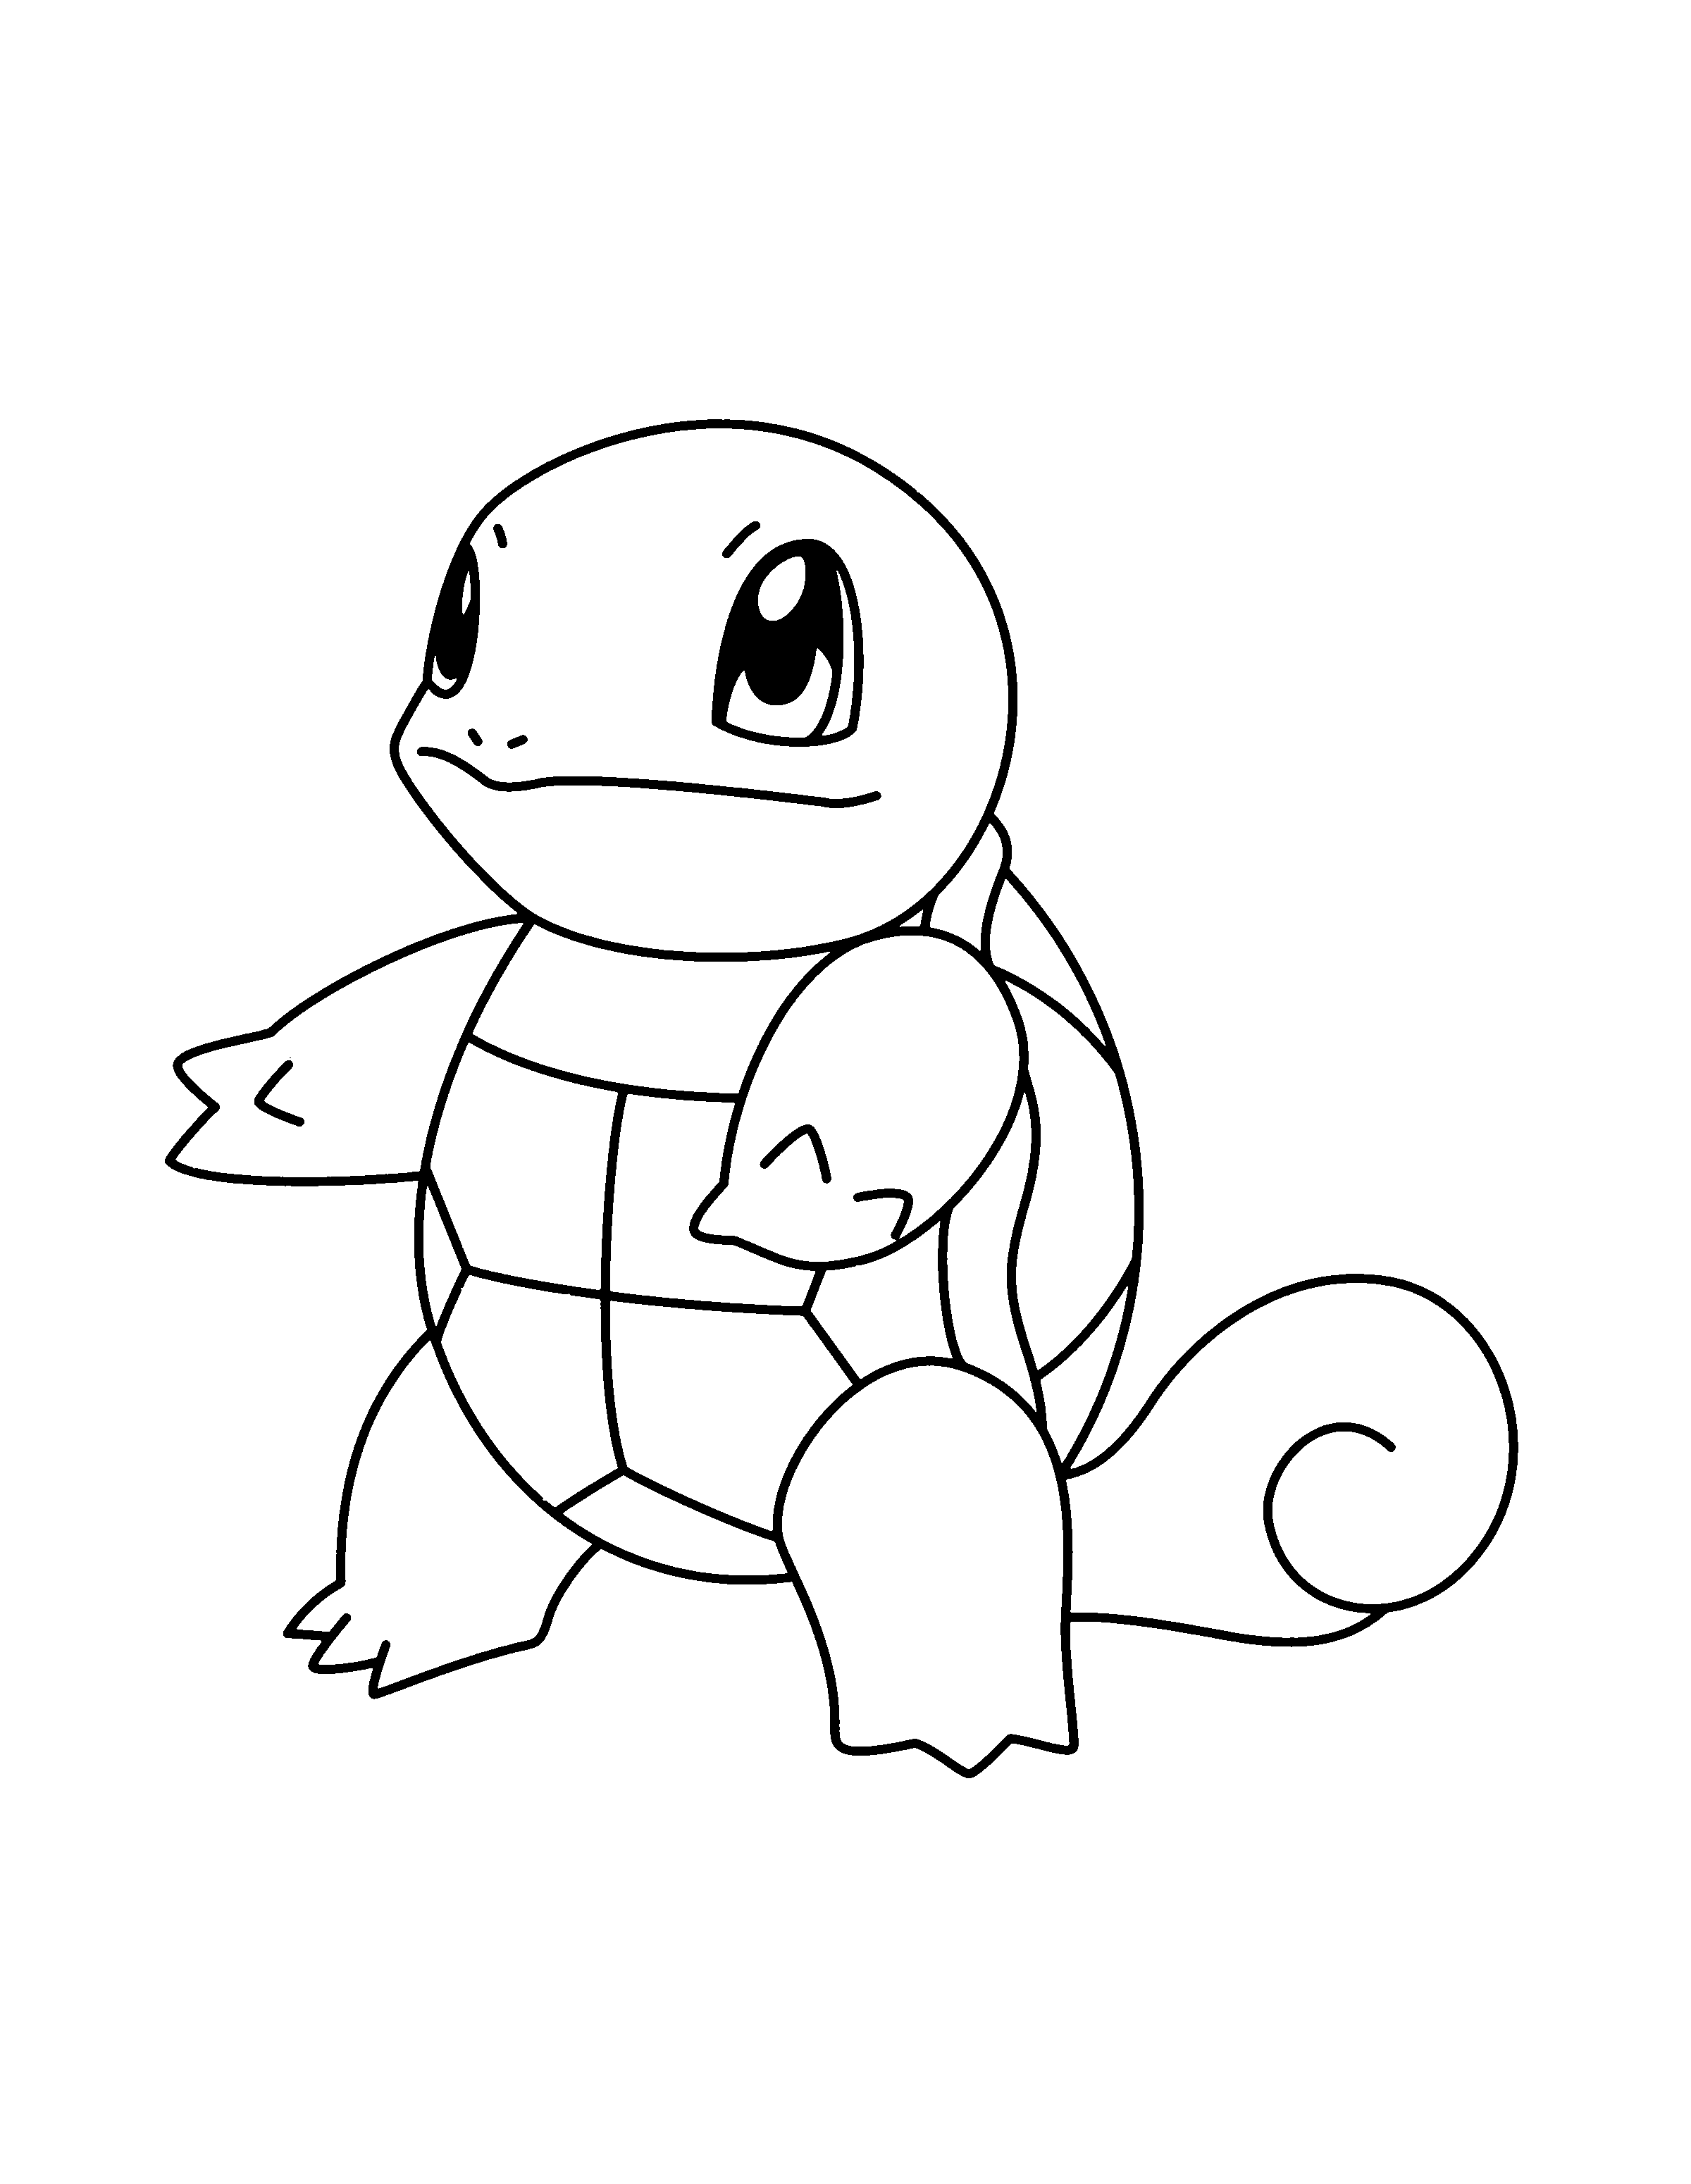 animated-coloring-pages-pokemon-image-0997